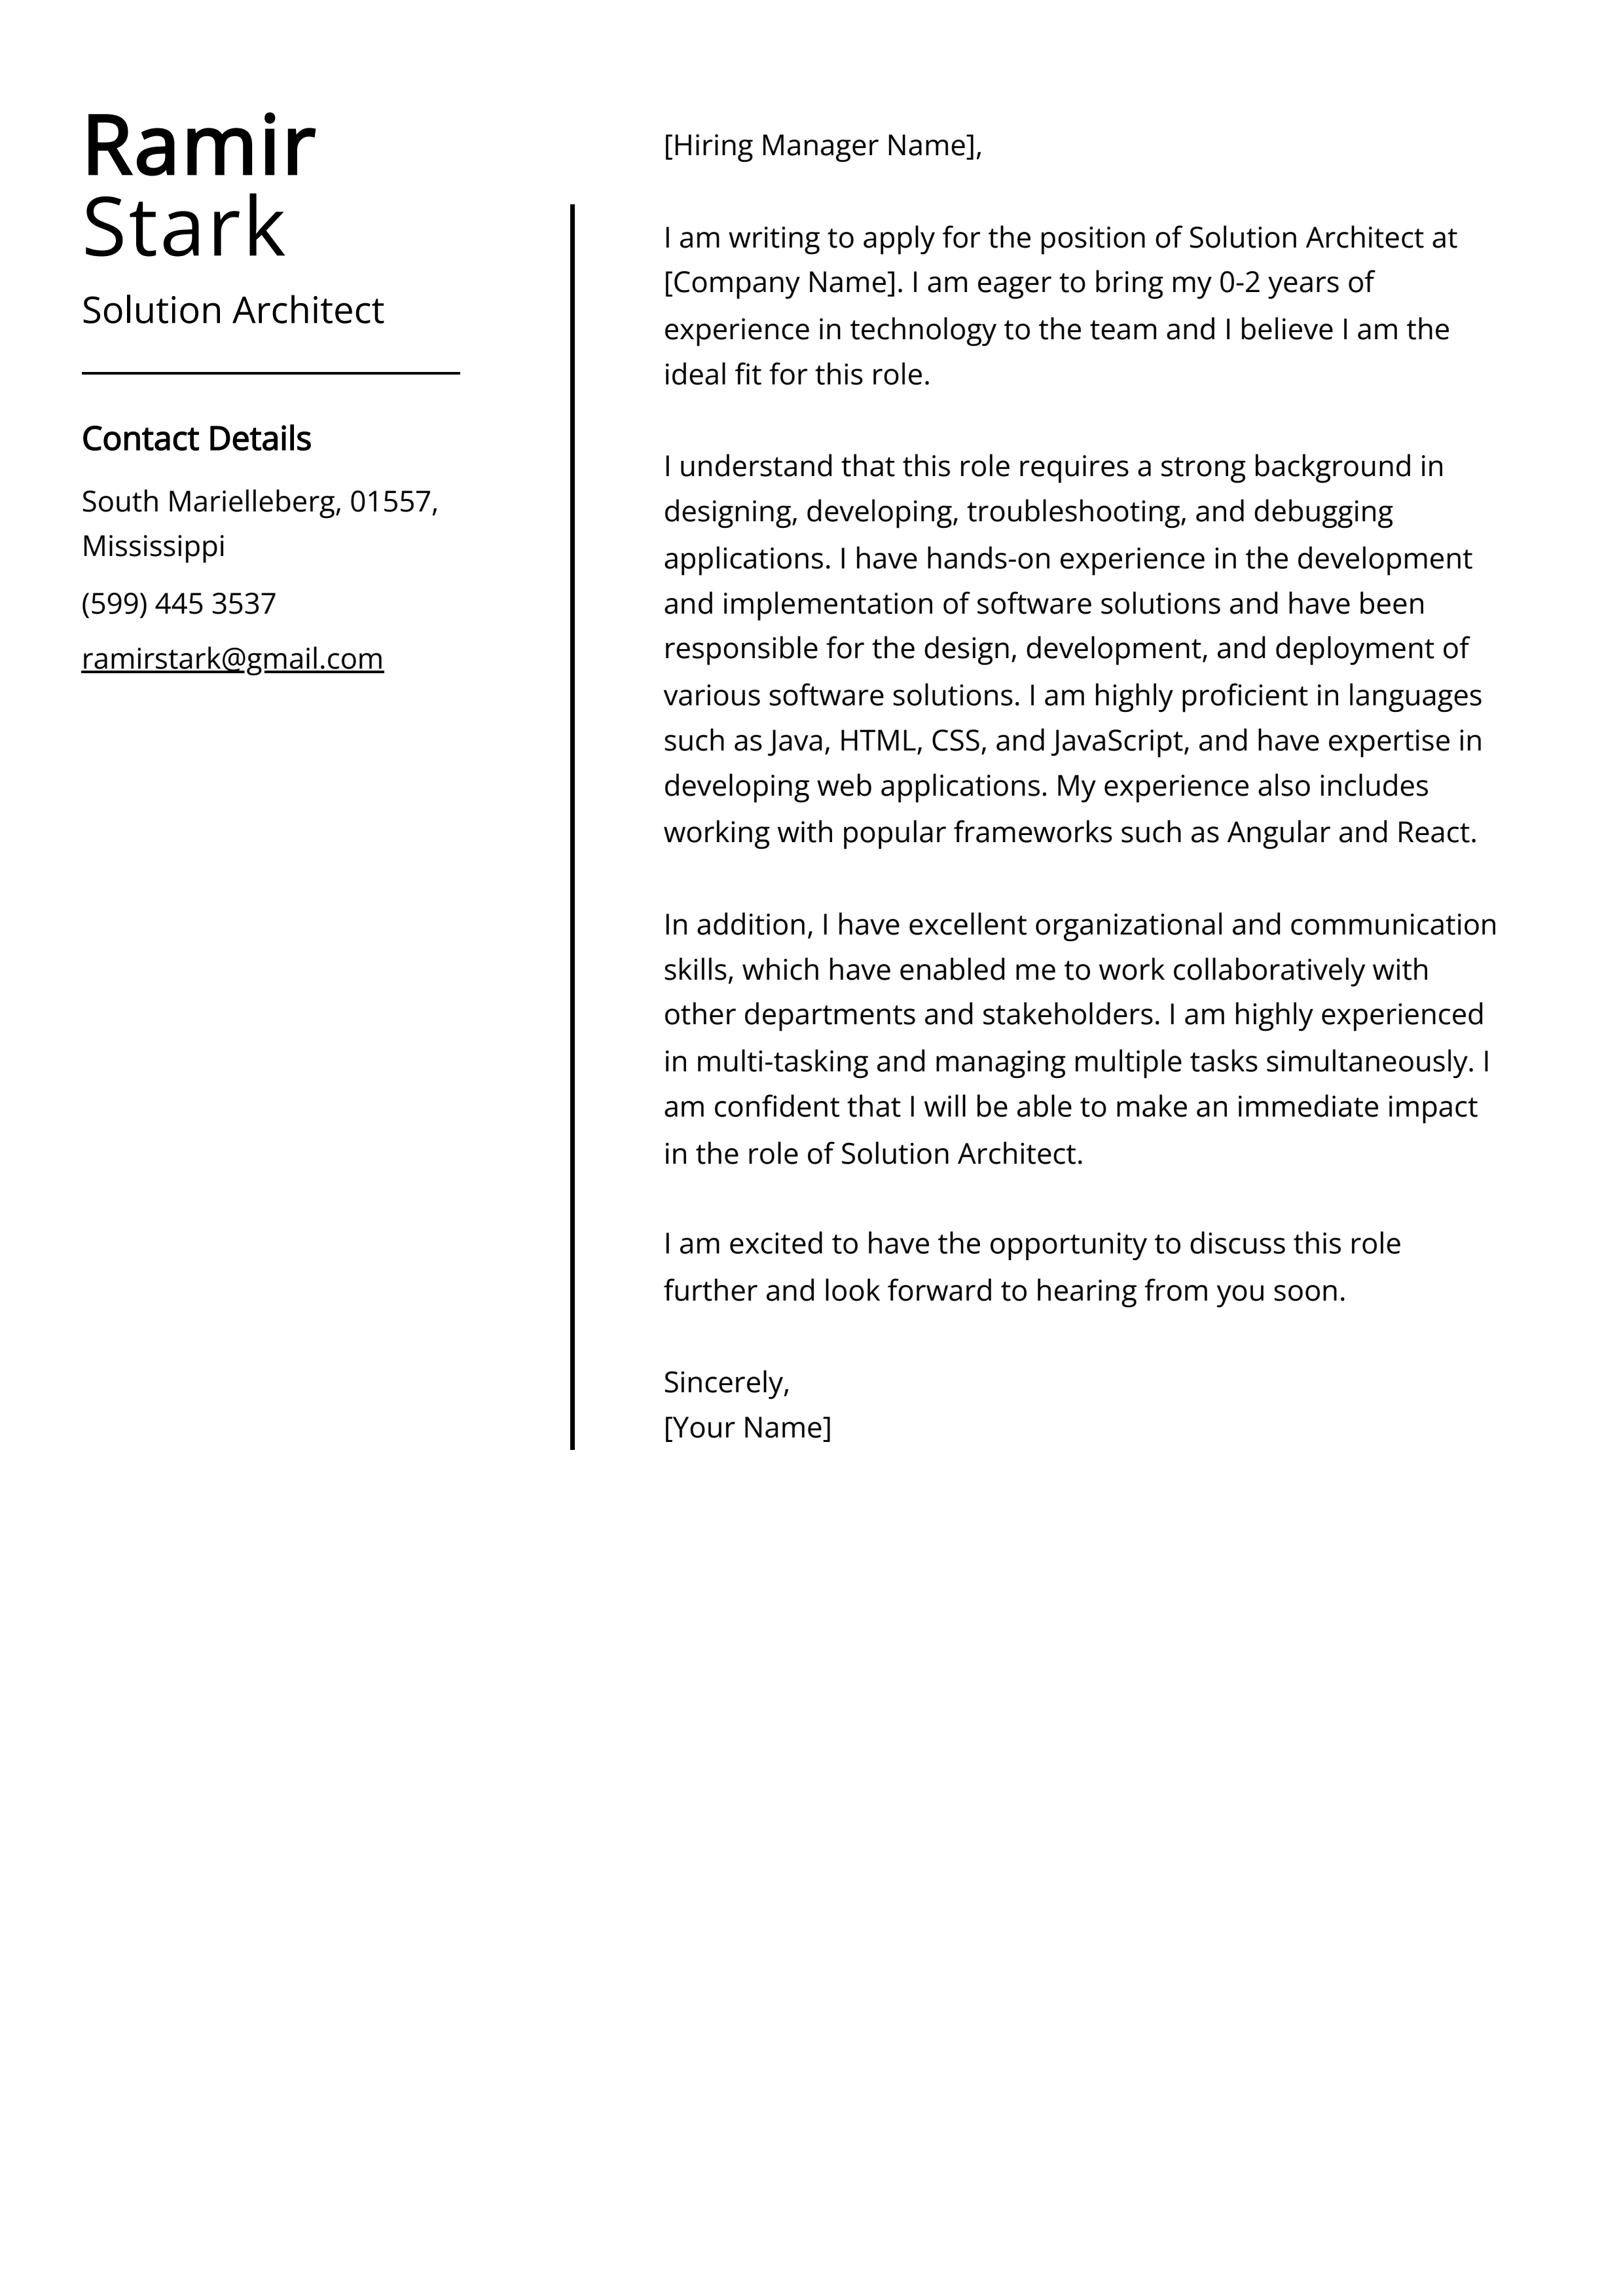 Solution Architect Cover Letter Example